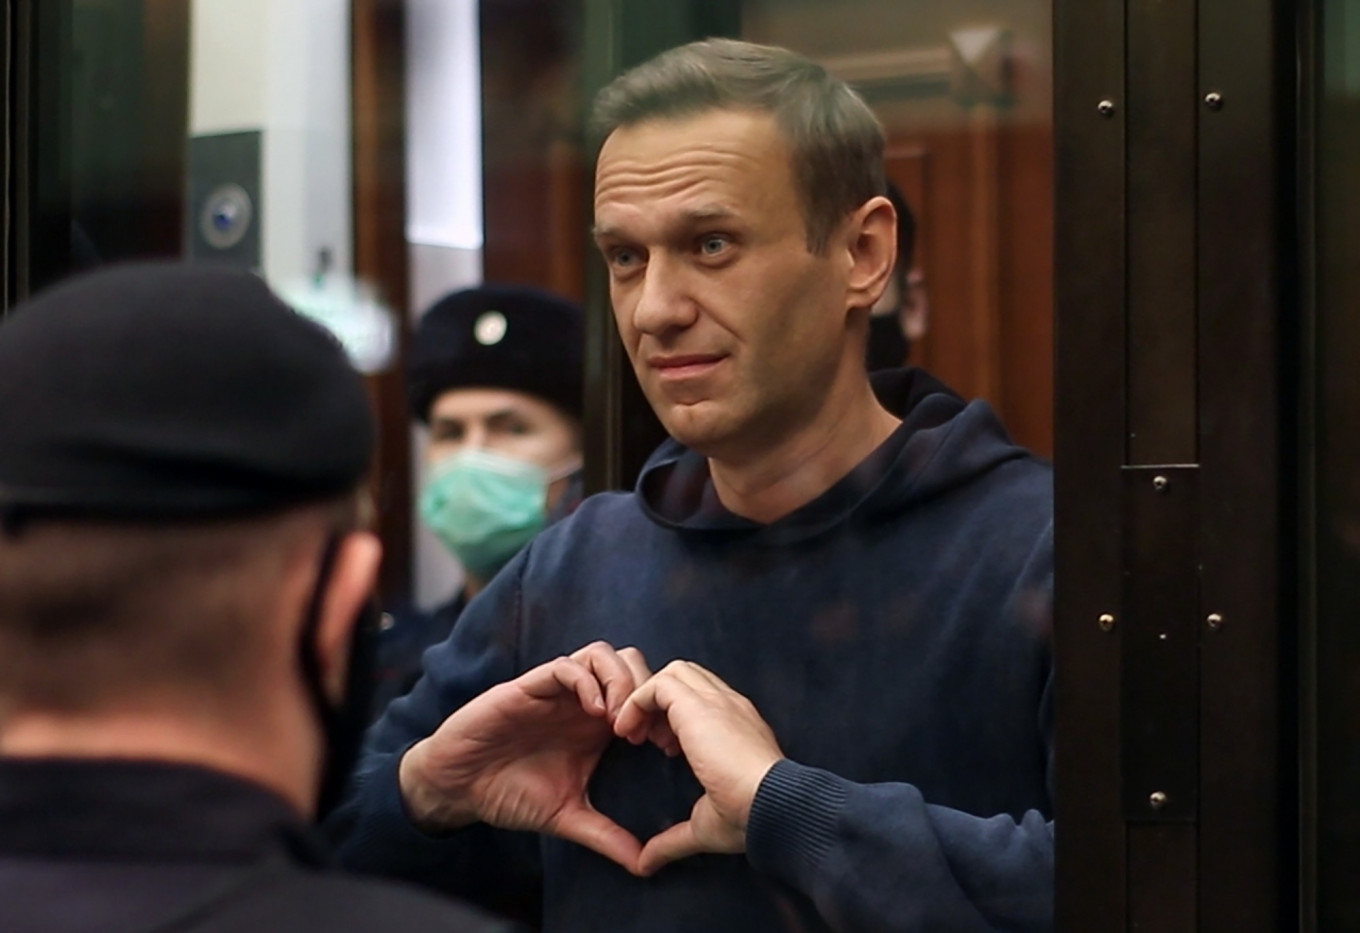 Navalny Urges Supporters to Fight For Freedom in First Post After Sentencing